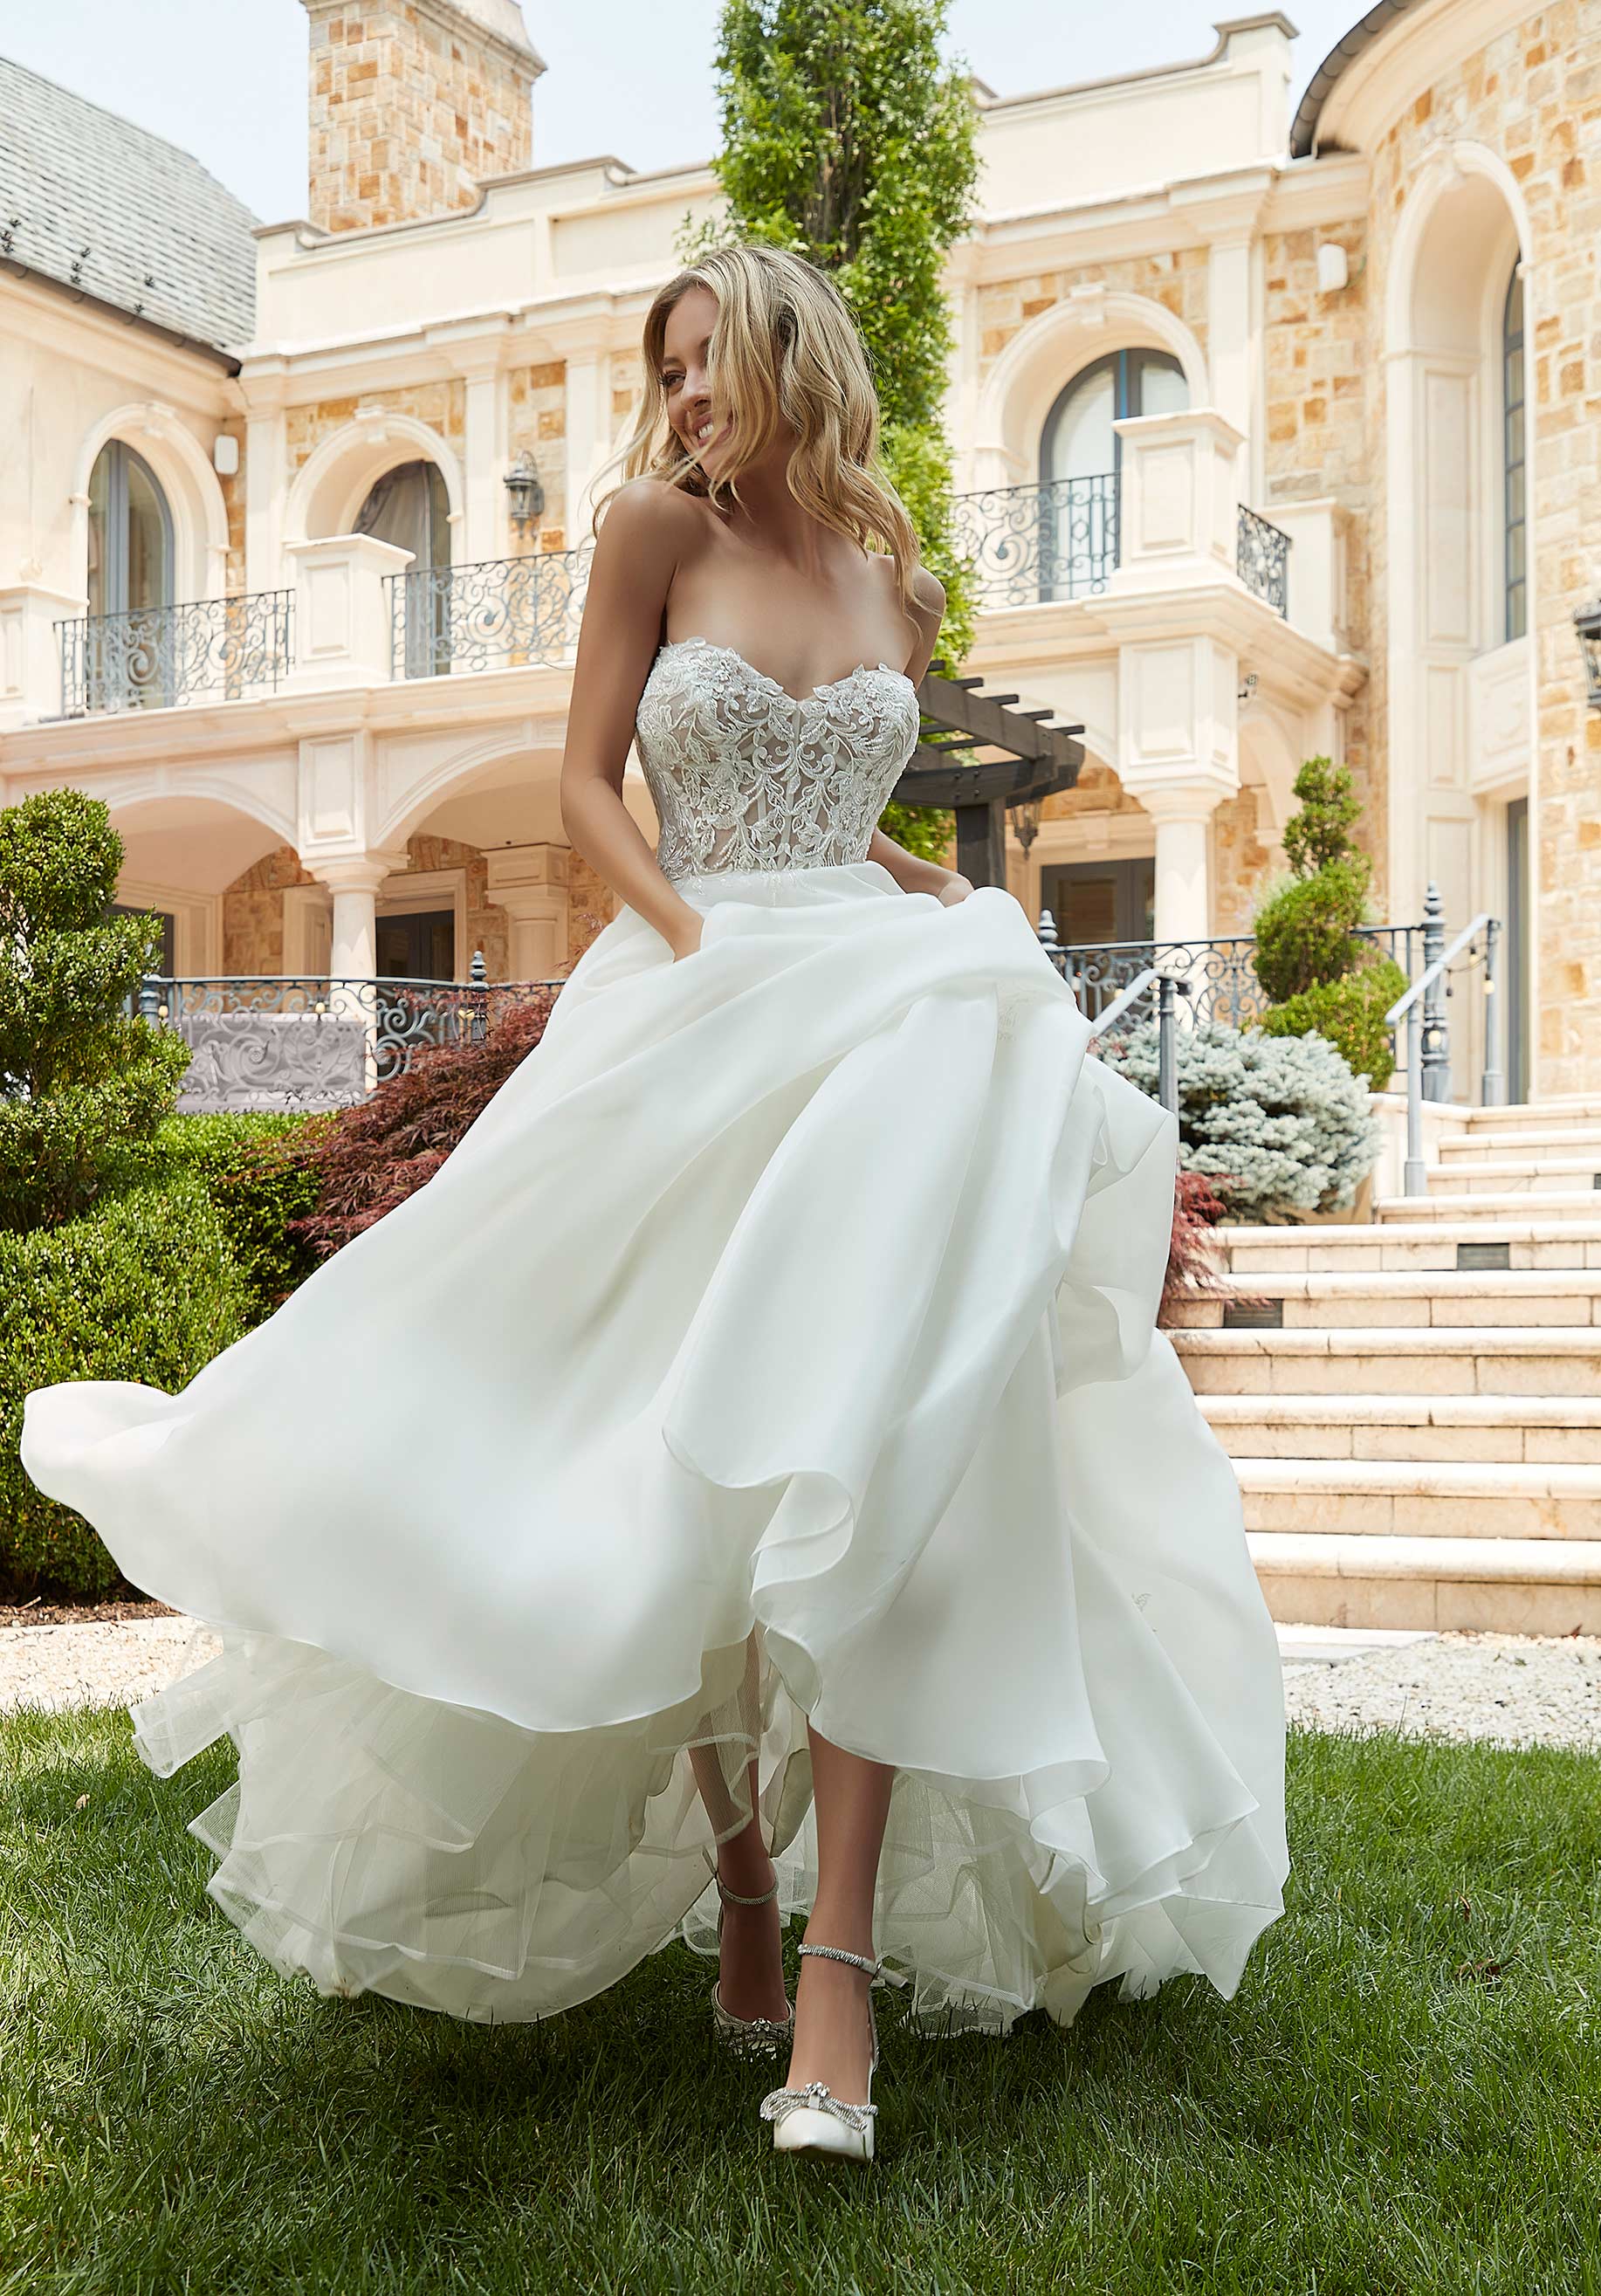 Strapless Ball Gown Wedding Dress with Bow